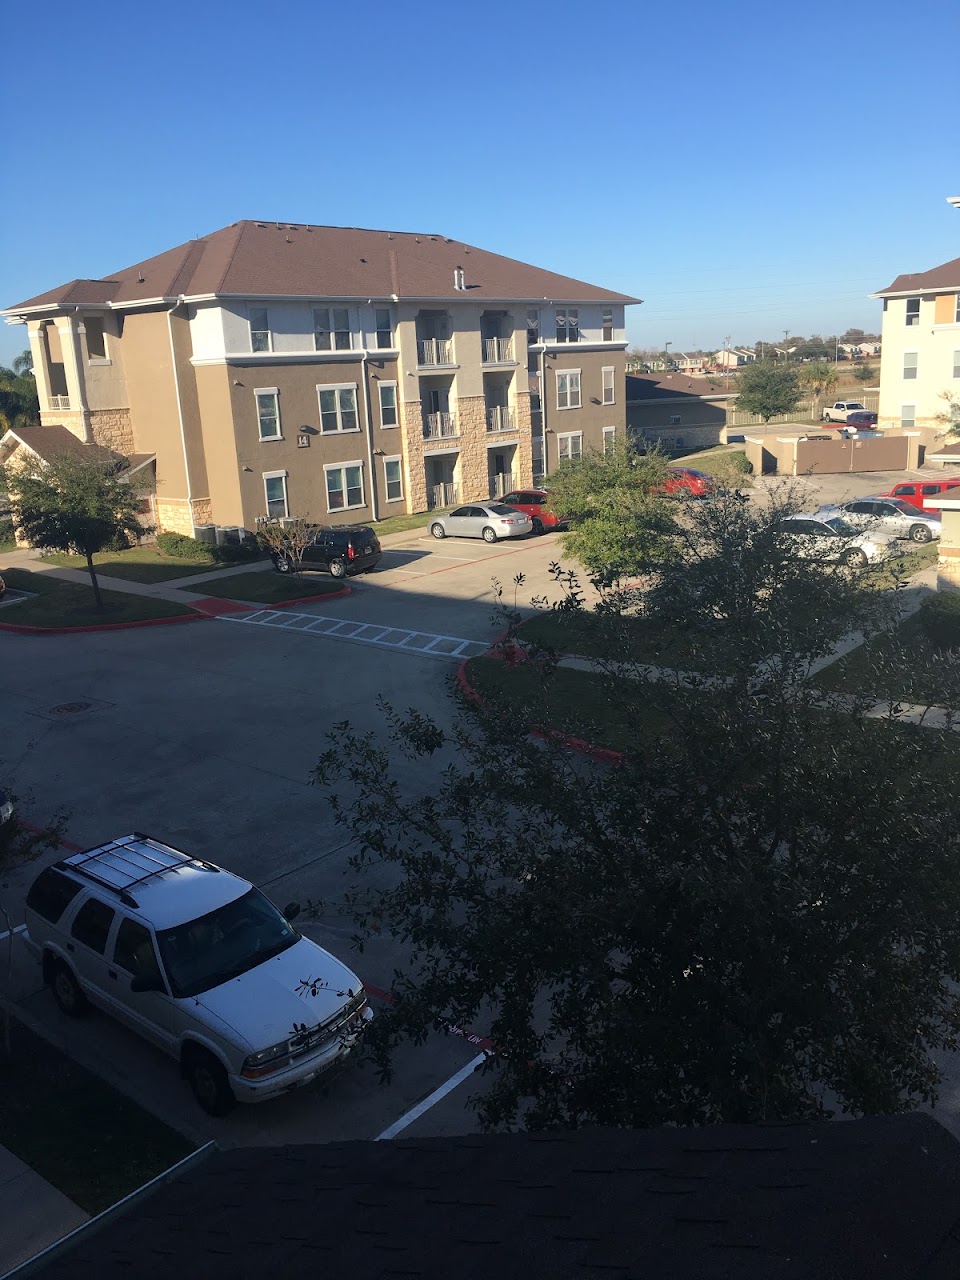 Photo of COSTA MARIPOSA. Affordable housing located at 7555 MEDICAL CTR DR TEXAS CITY, TX 77591